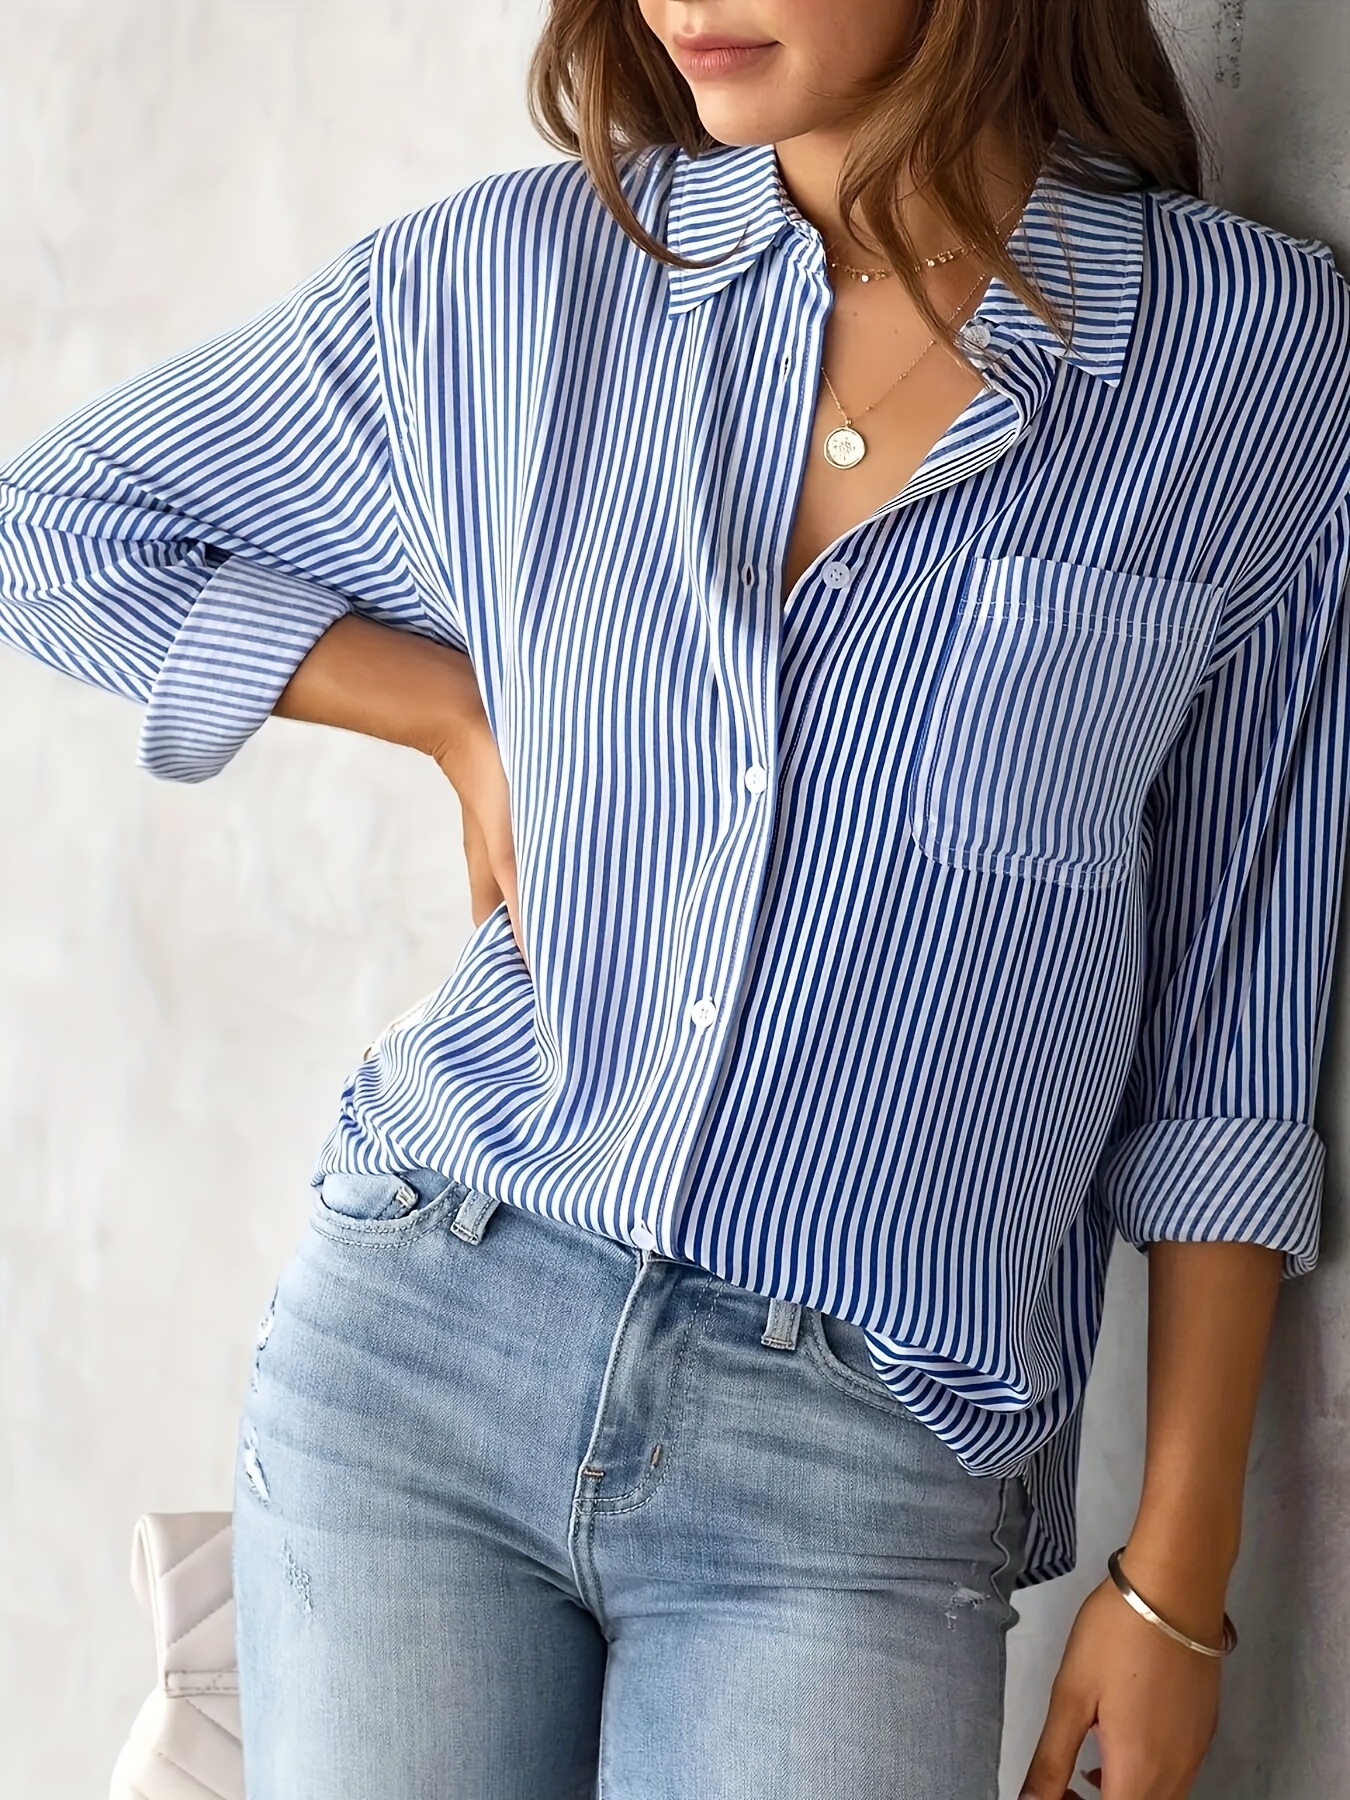 striped print button front shirt casual long sleeve shirt with pocket womens clothing details 16